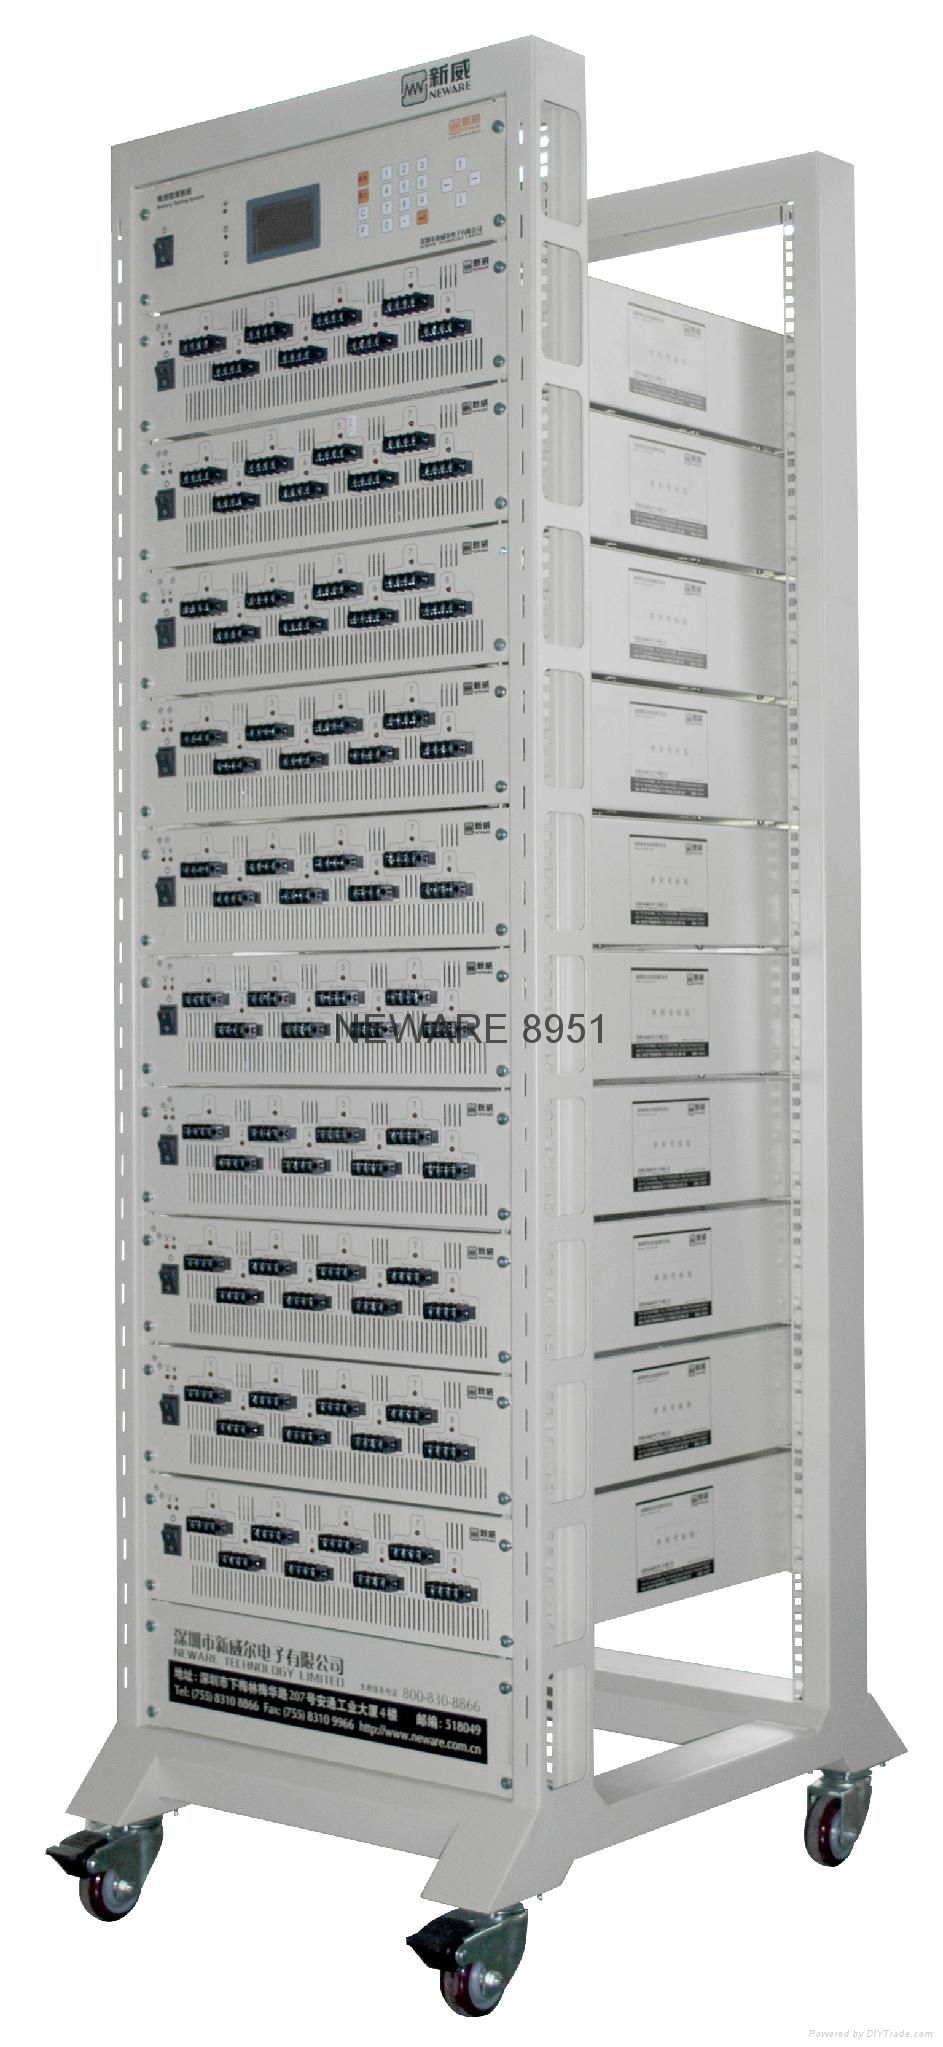 80 channel/10 set battery testing system with rack